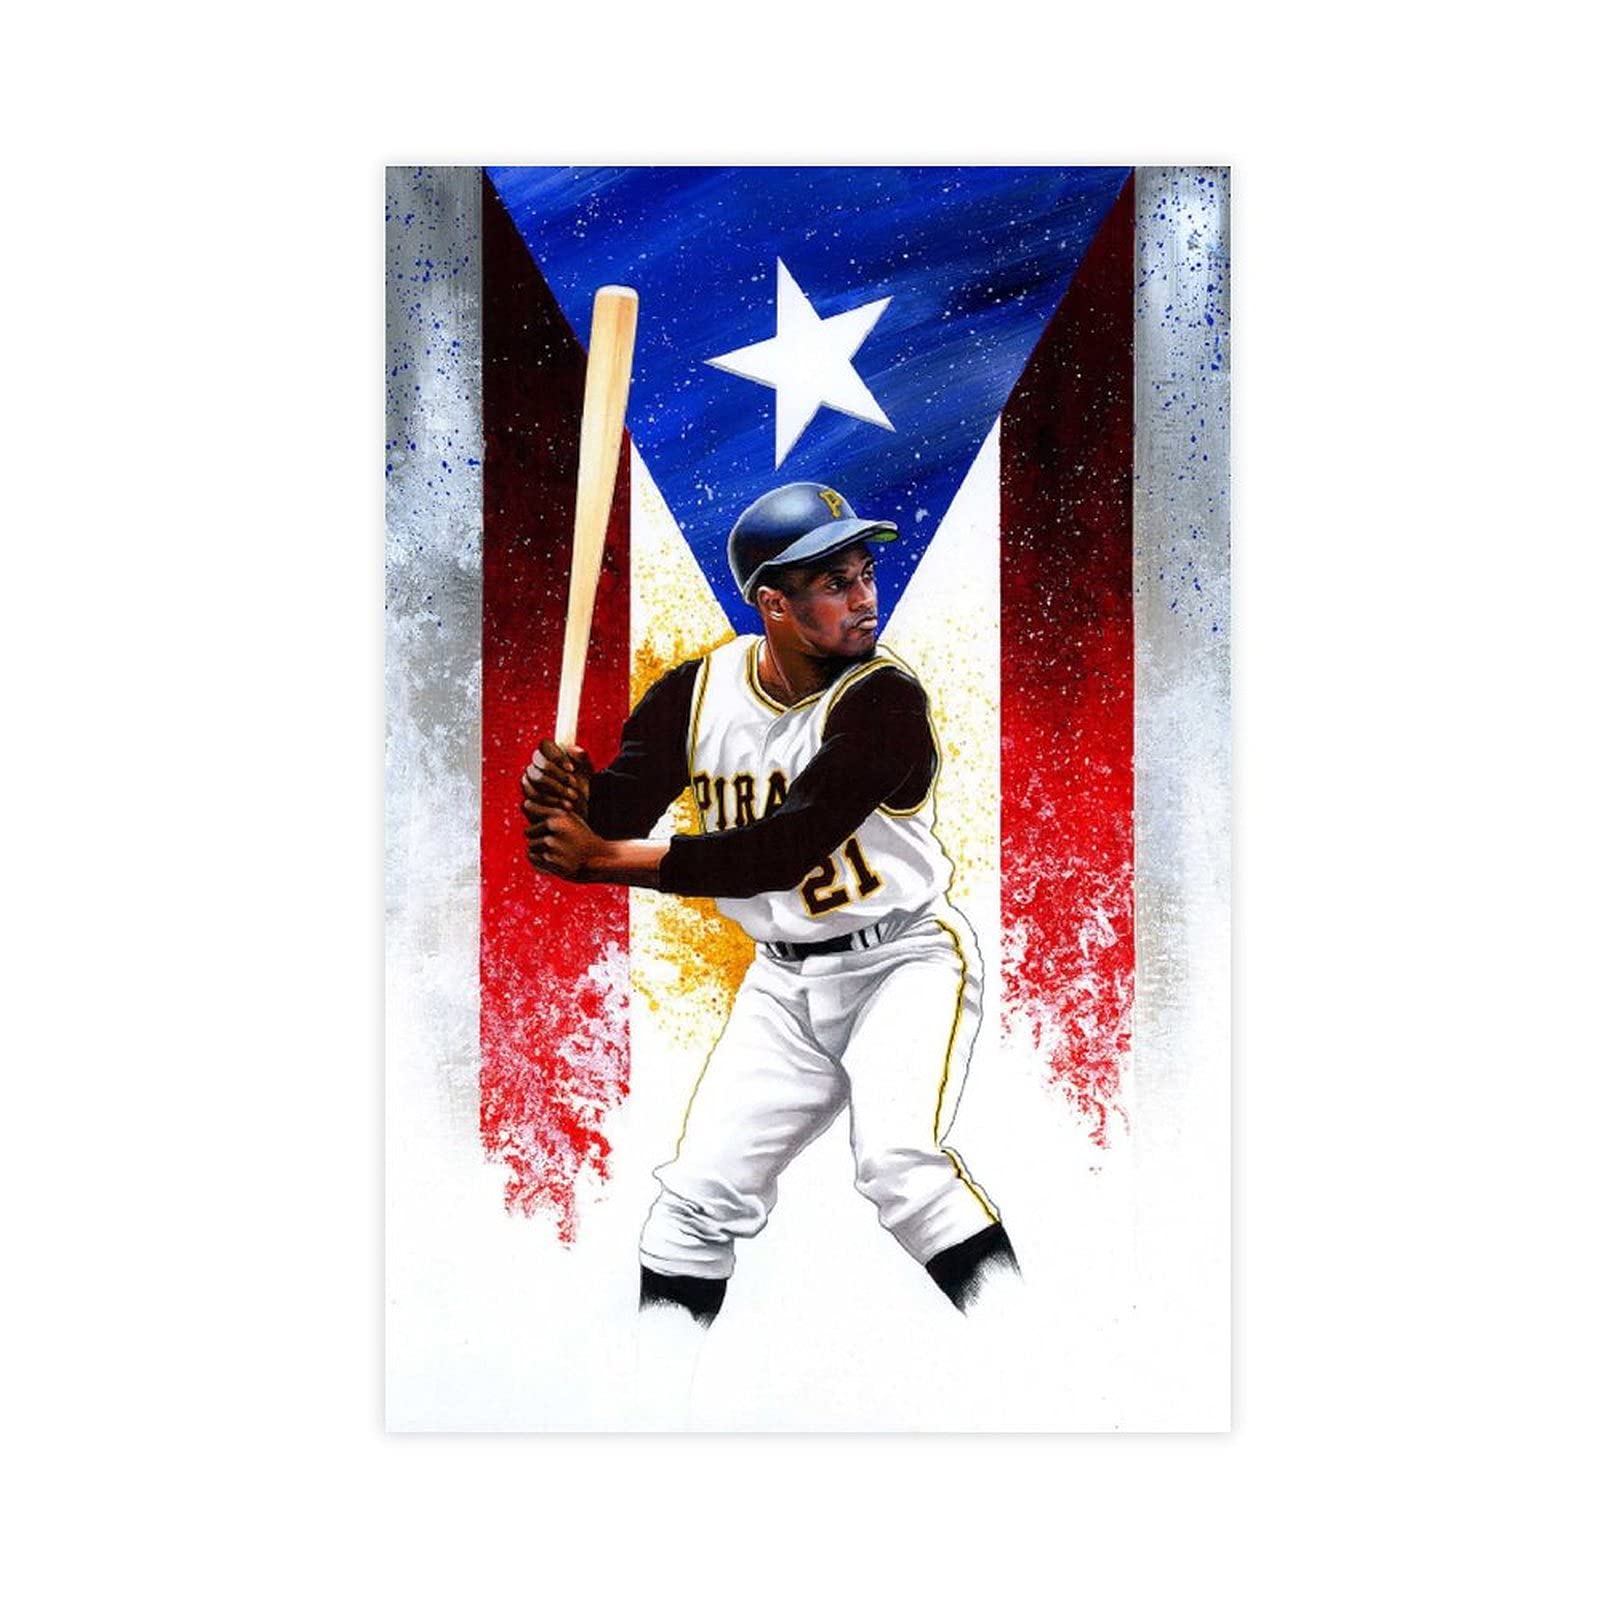 Roberto Clemente wallpaper by Pitin2017 - Download on ZEDGE™